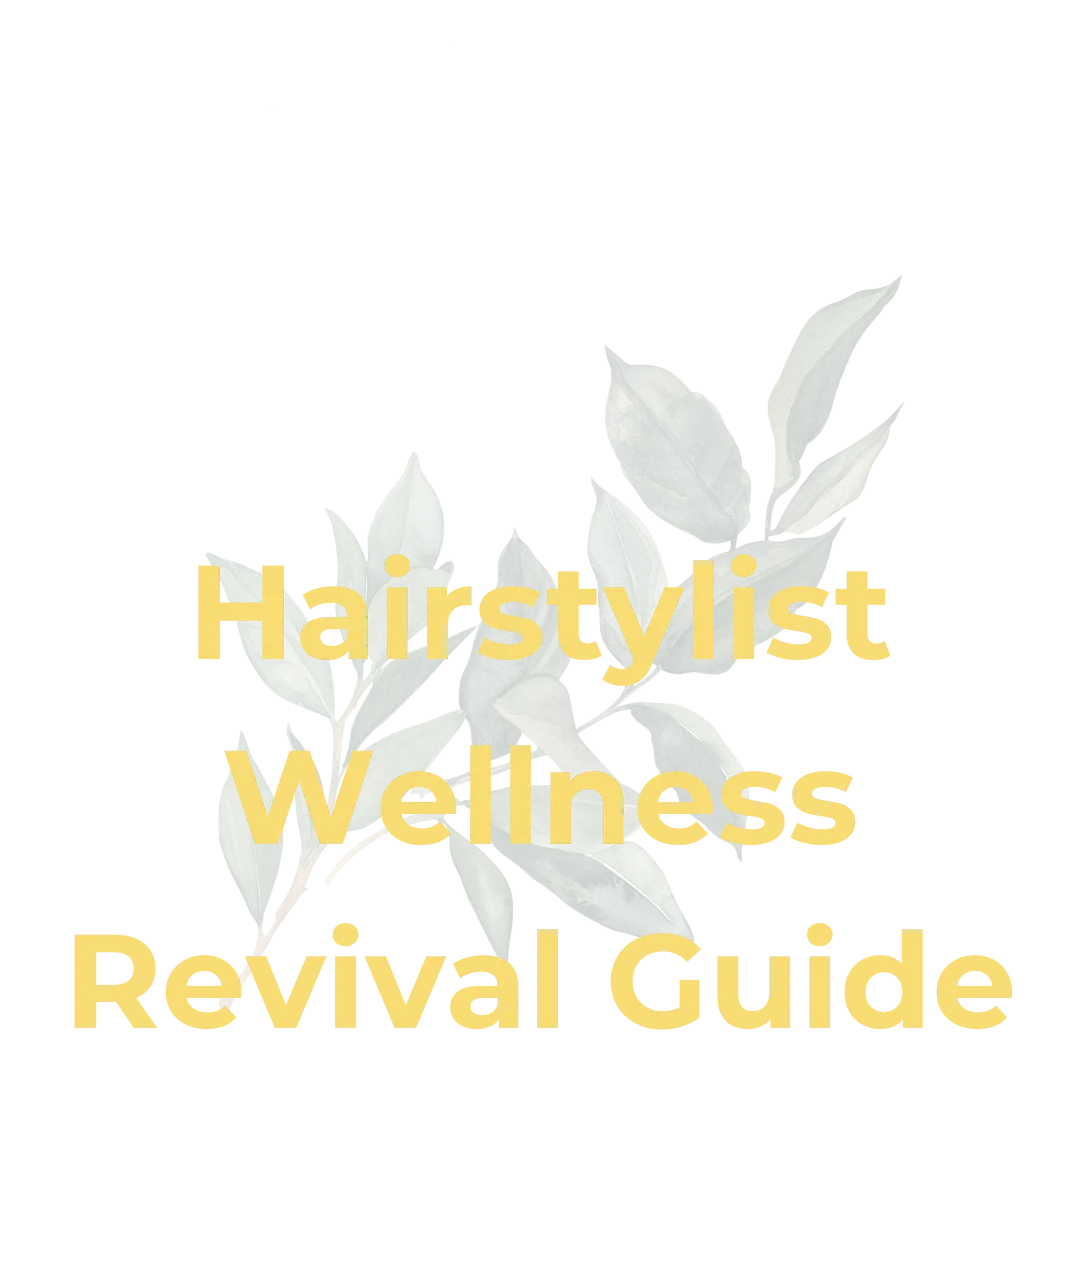 Text Image for the Hairstylist Wellness Revival Guide 